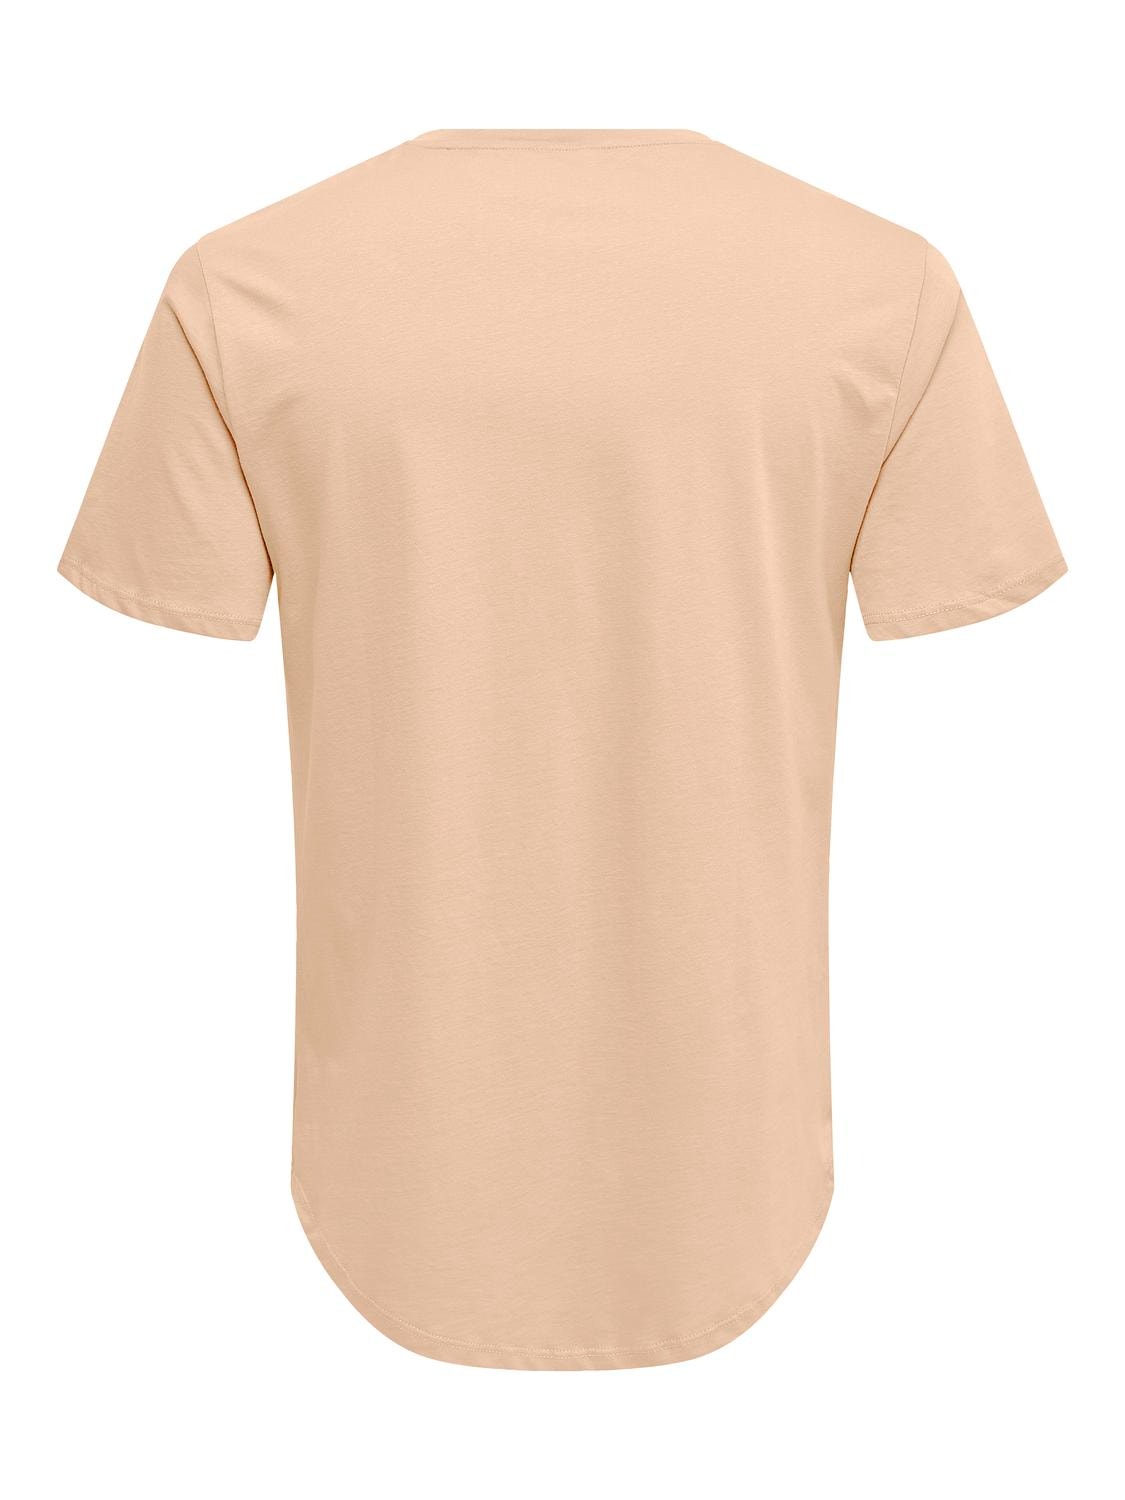 ONLY & SONS Long o-neck t-shirt -Peach Nectar - 22002973